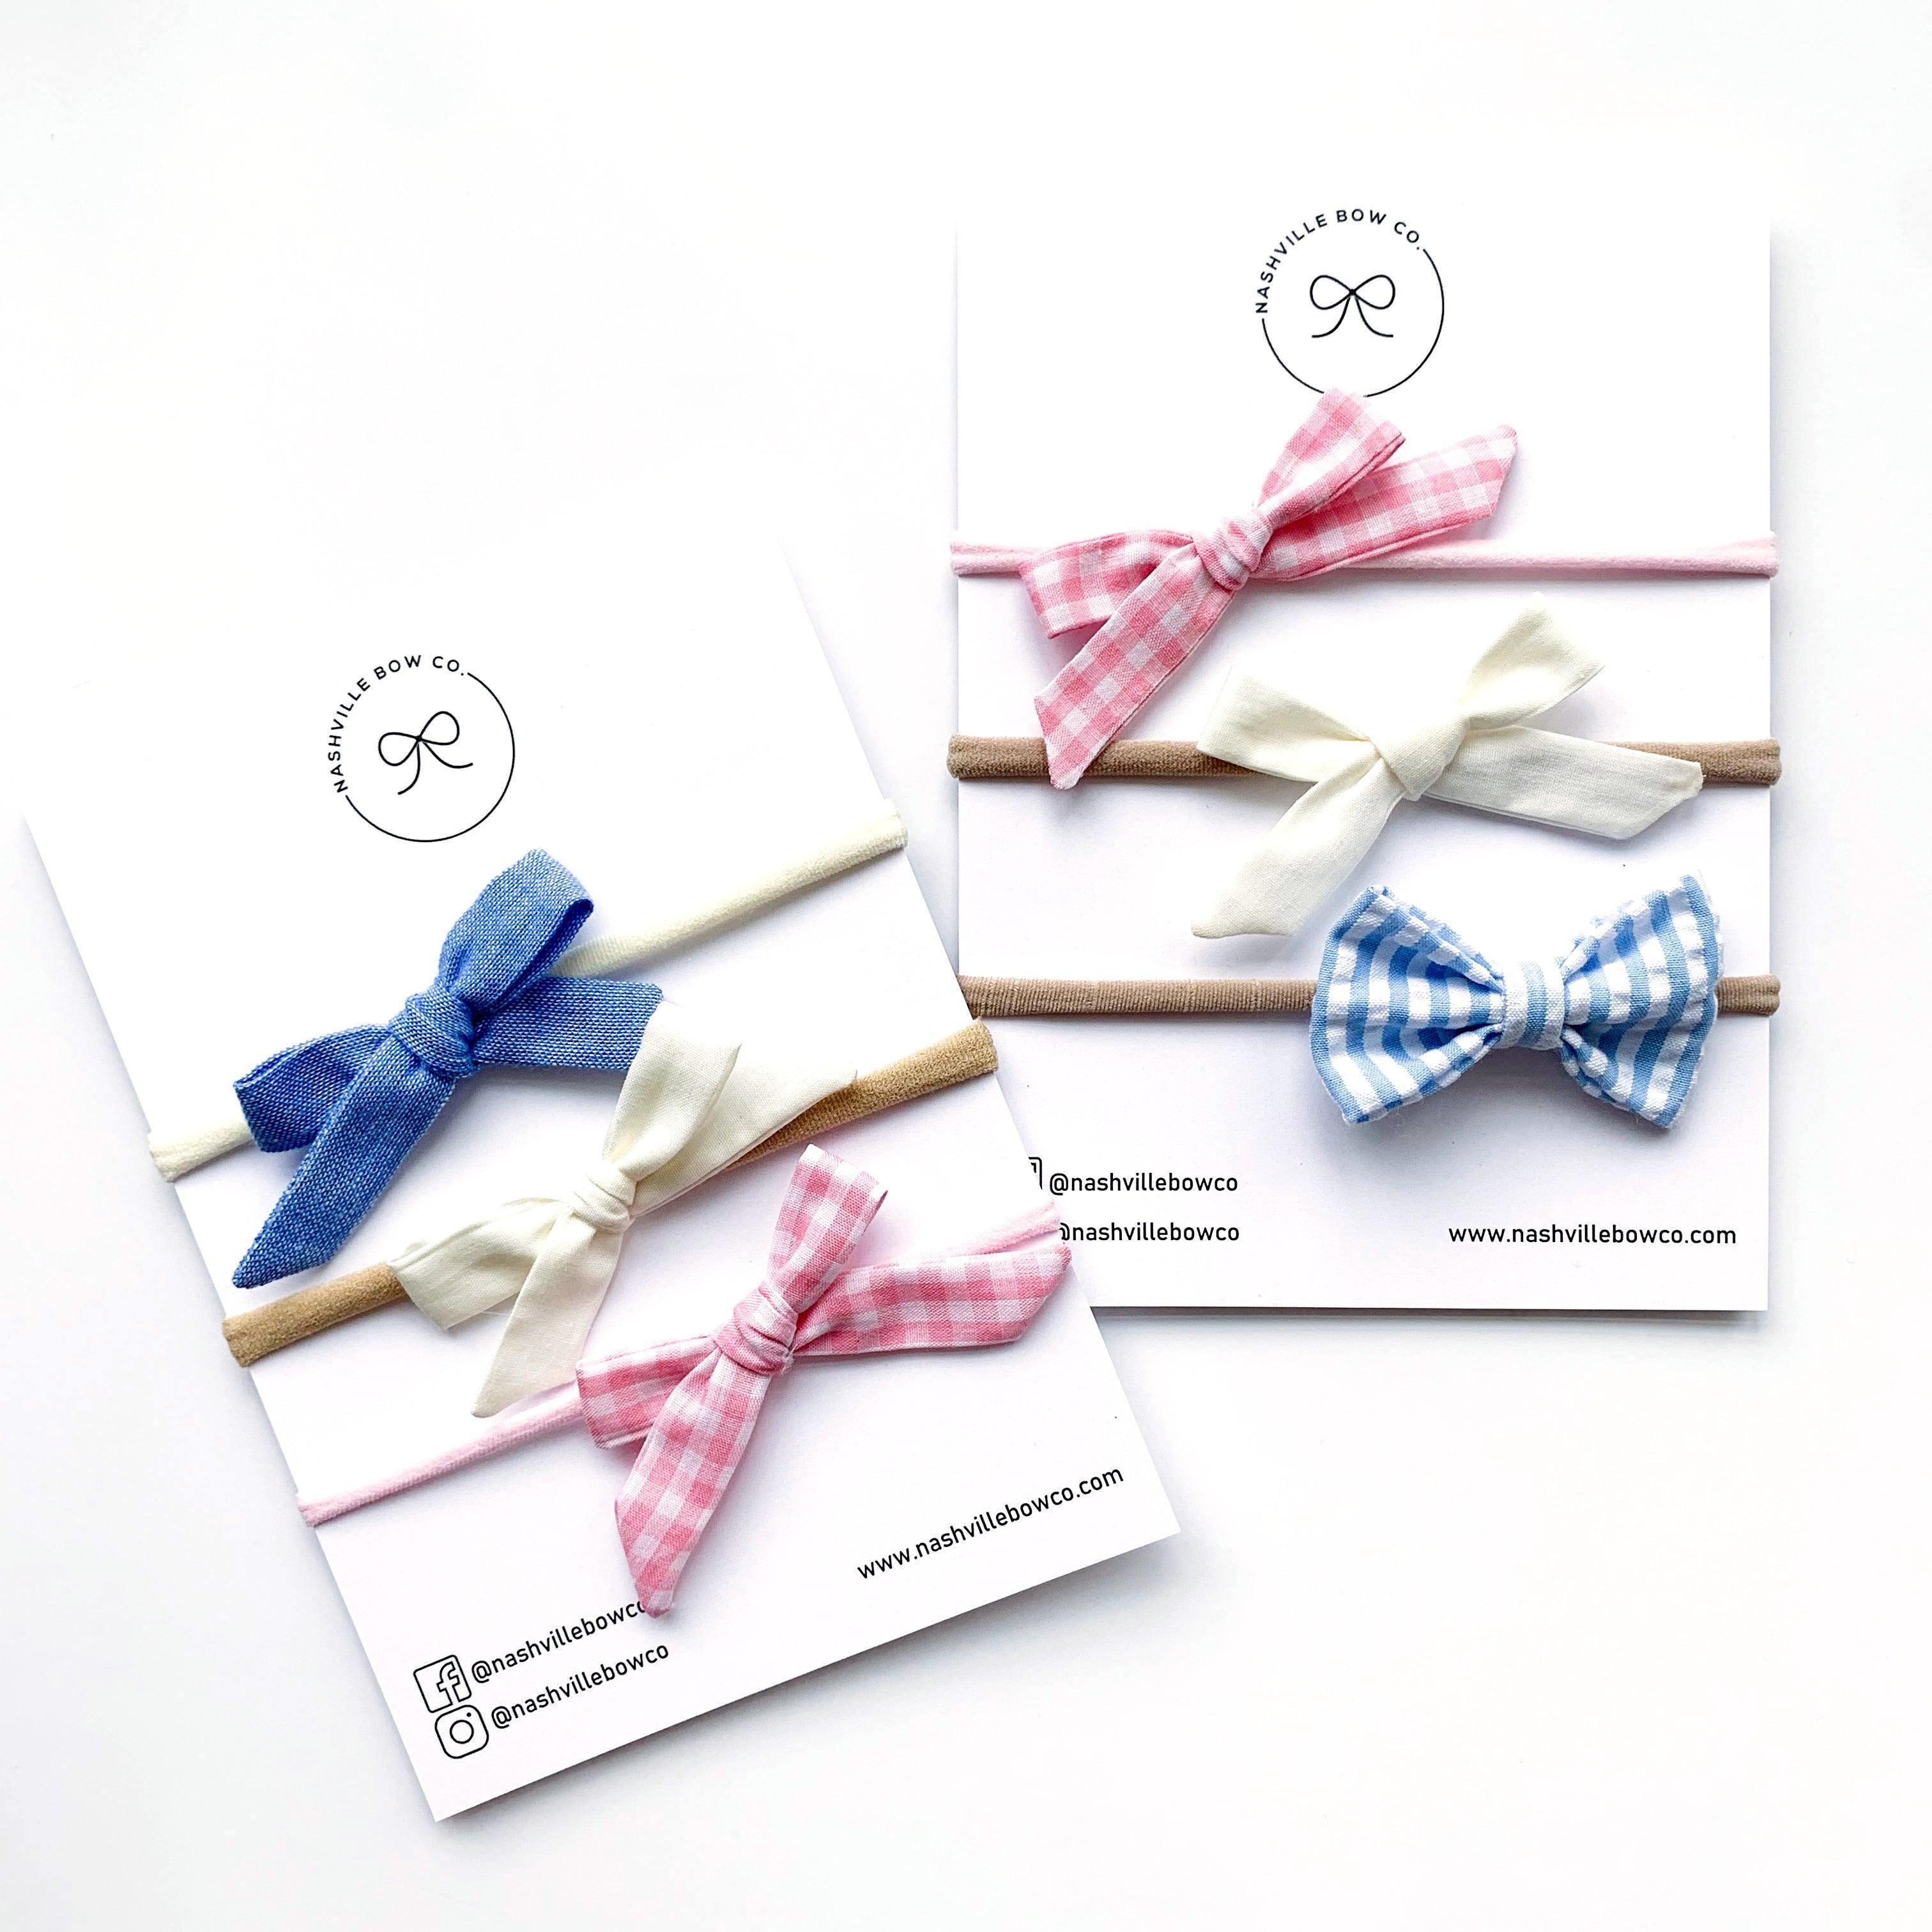 New Girl Bow - Blue Jean Baby | Nashville Bow Co. - Classic Hair Bows, Bow Ties, Basket Bows, Pacifier Clips, Wreath Sashes, Swaddle Bows. Classic Southern Charm.